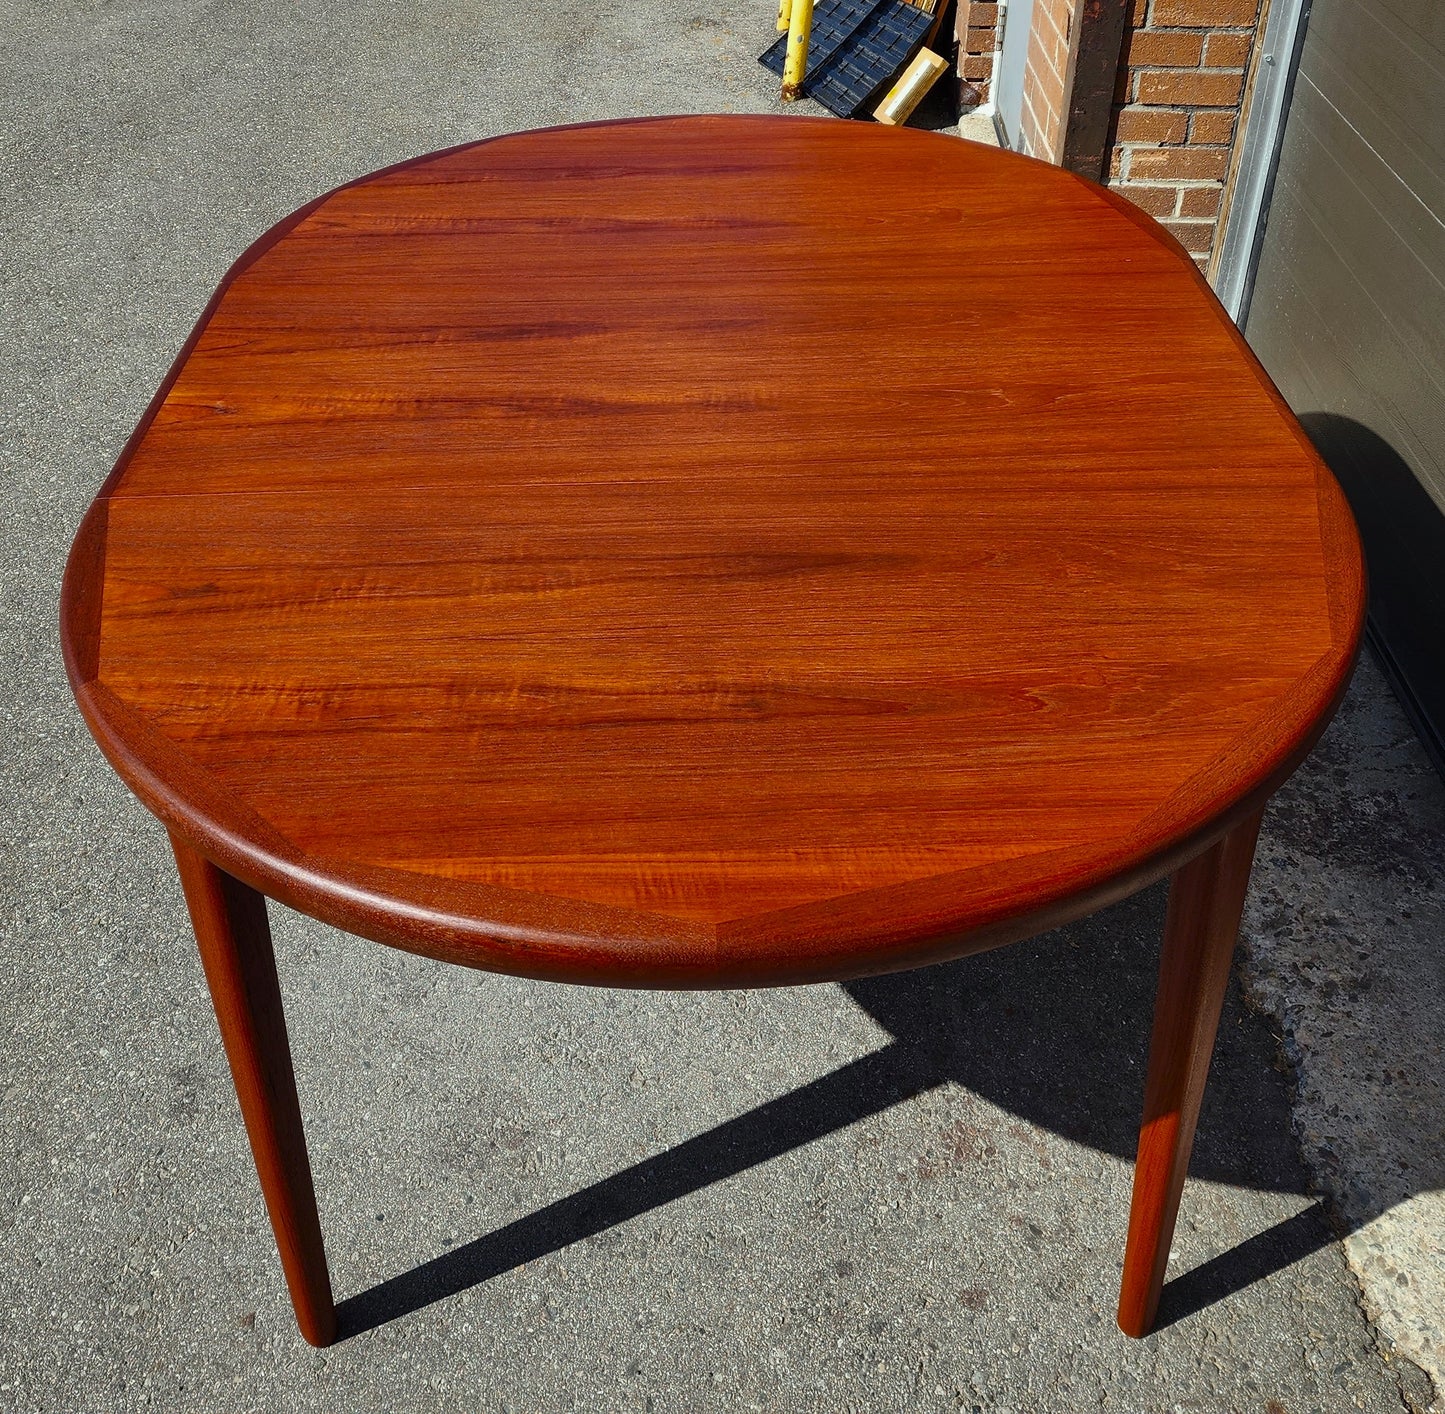 REFINISHED Danish Mid Century Modern Teak Table Round to Oval  47"- 66.5" by Spottrup